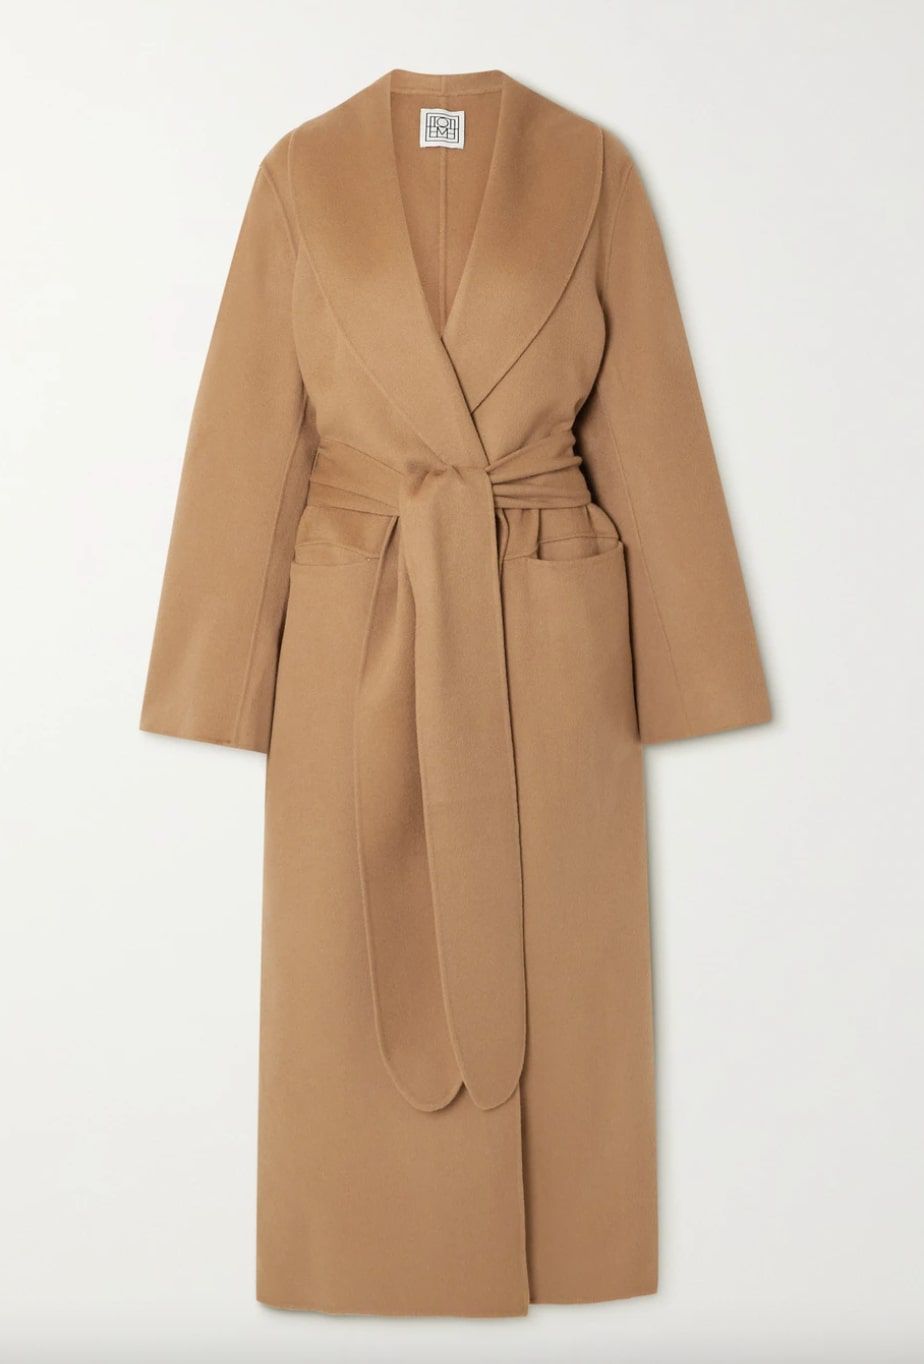 toteme-camel-belted-wool-coat